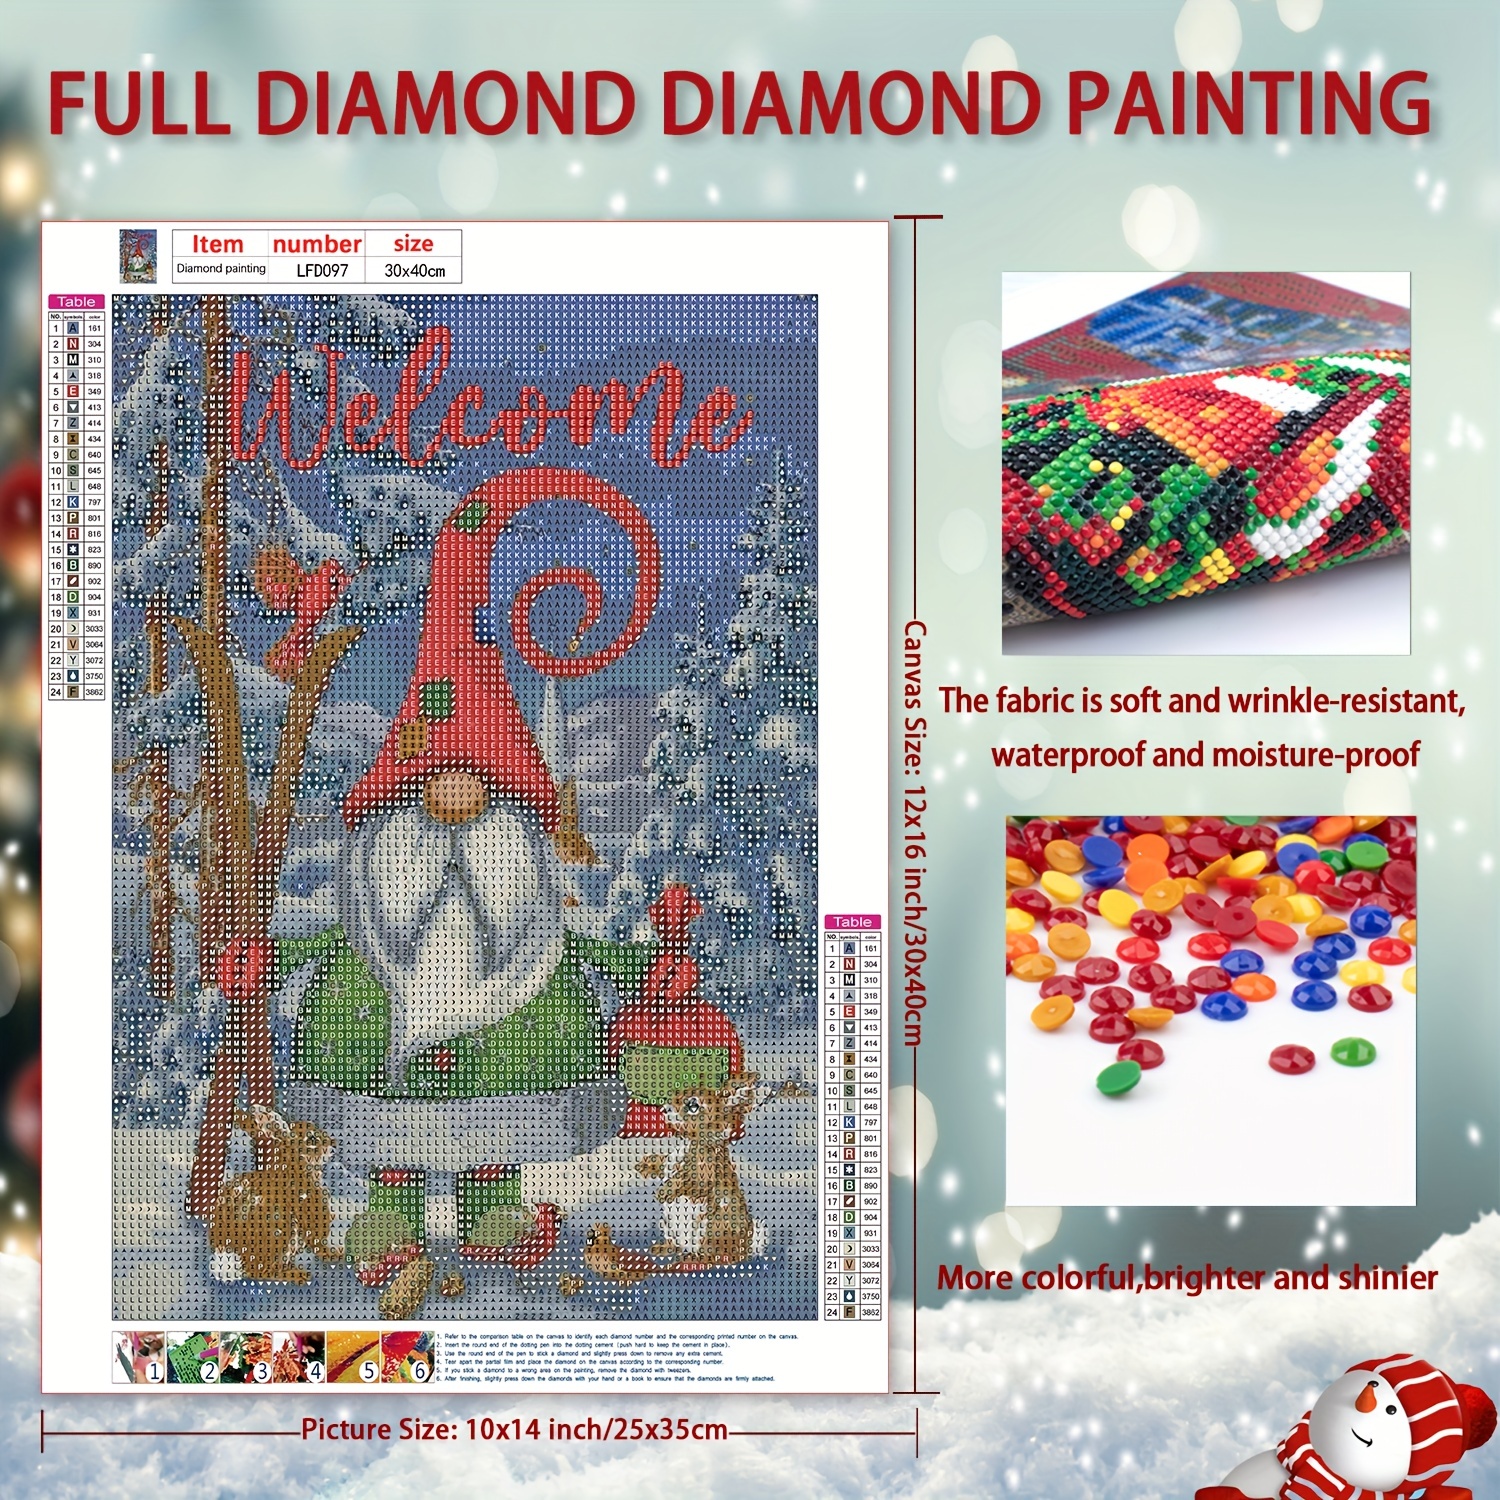 Christmas Gnome Diamond Art Painting Kits for Adults - 12X16Inch